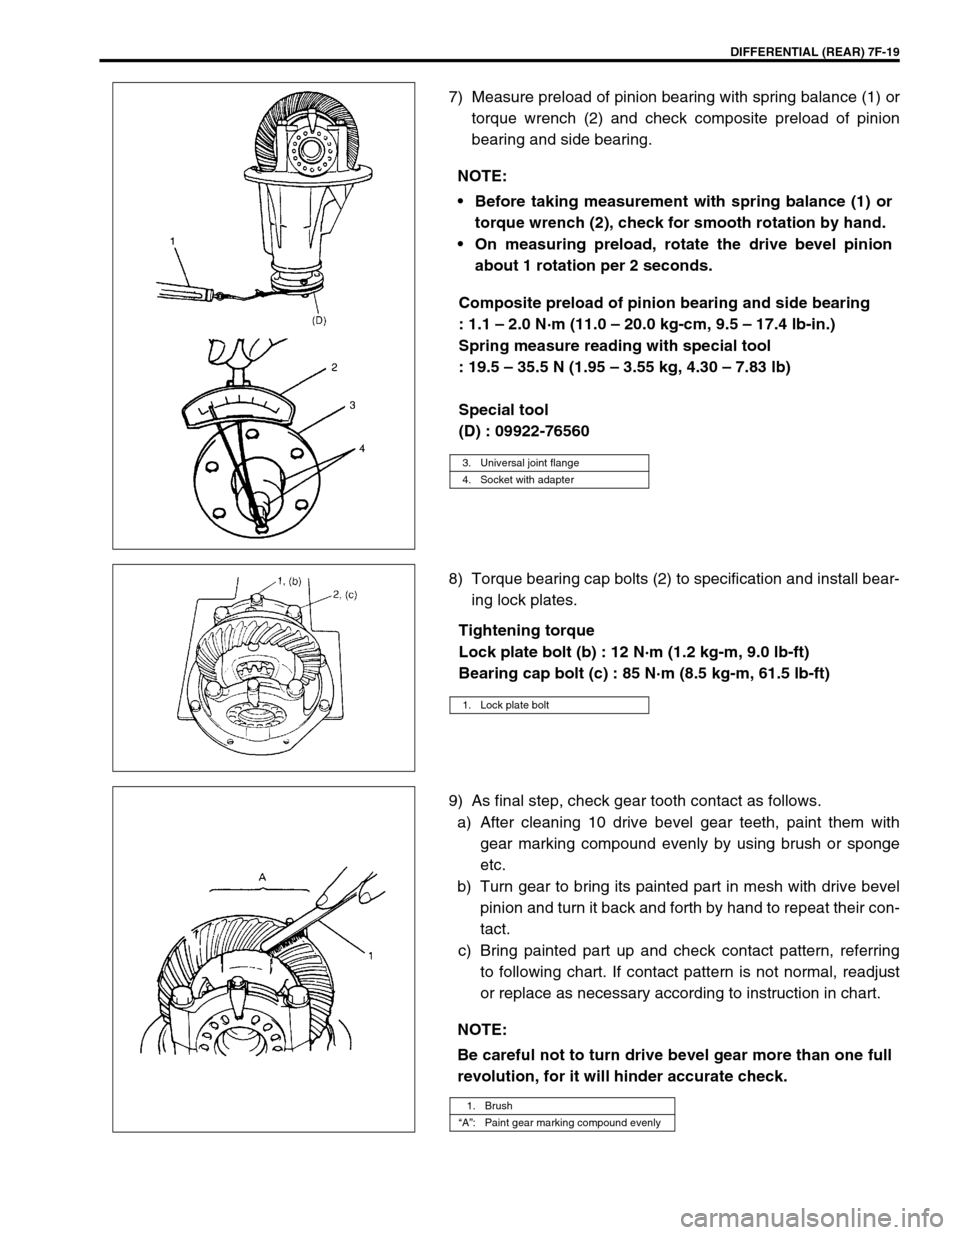 SUZUKI GRAND VITARA 1999 2.G Owners Manual DIFFERENTIAL (REAR) 7F-19
7) Measure preload of pinion bearing with spring balance (1) or
torque wrench (2) and check composite preload of pinion
bearing and side bearing.
Composite preload of pinion 